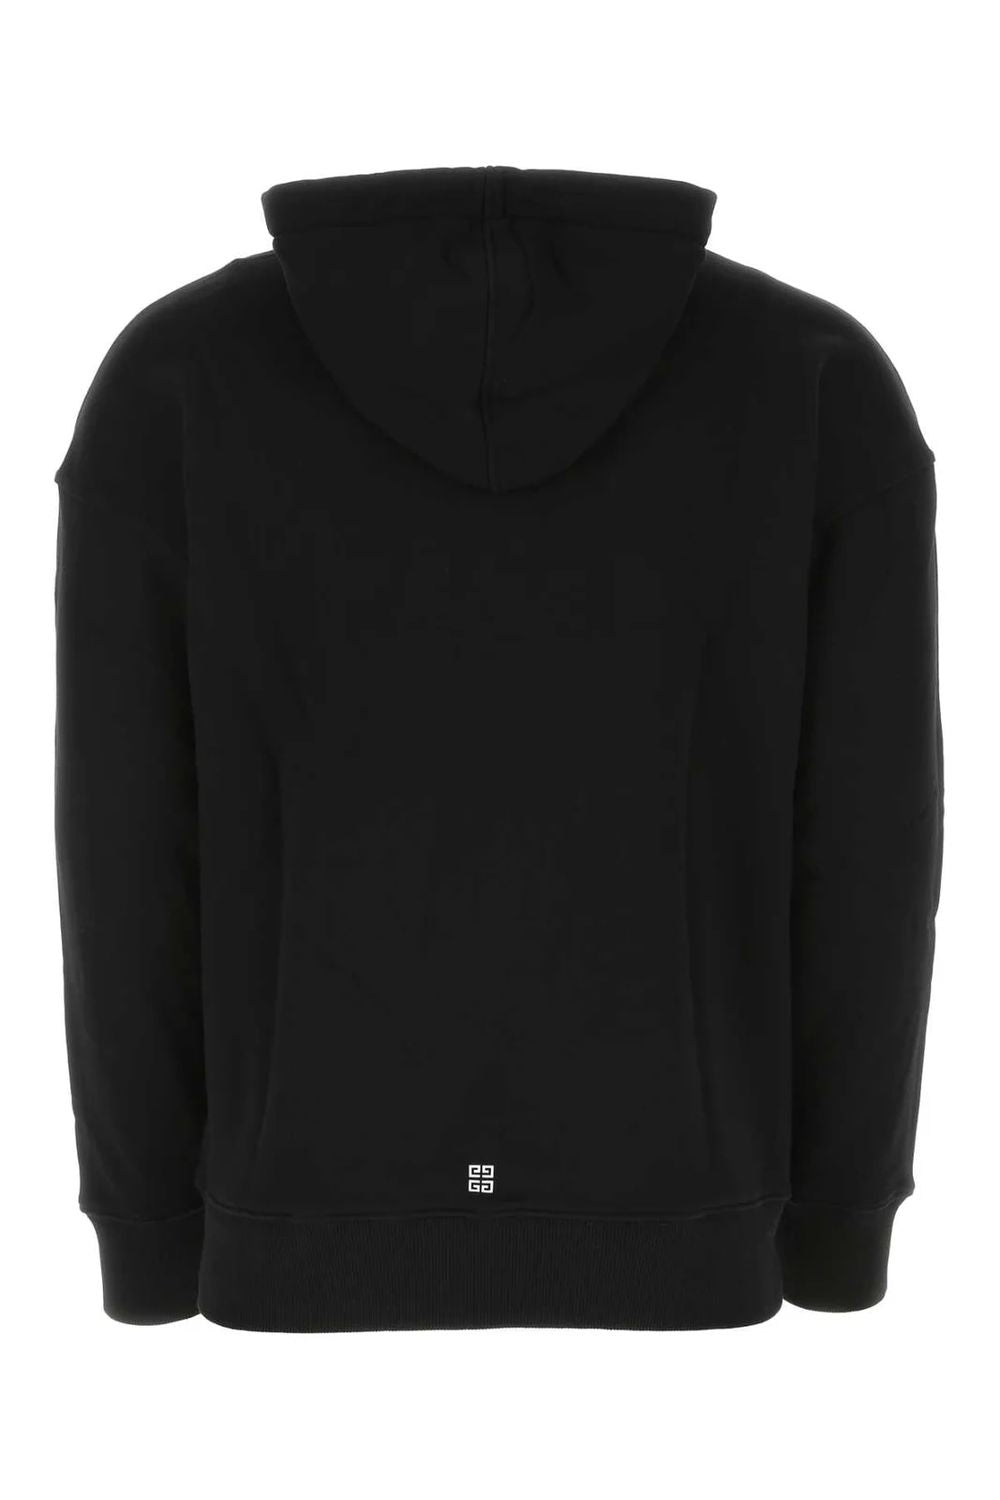 Black Slim Fit Hoodie for Men - SS24 Collection